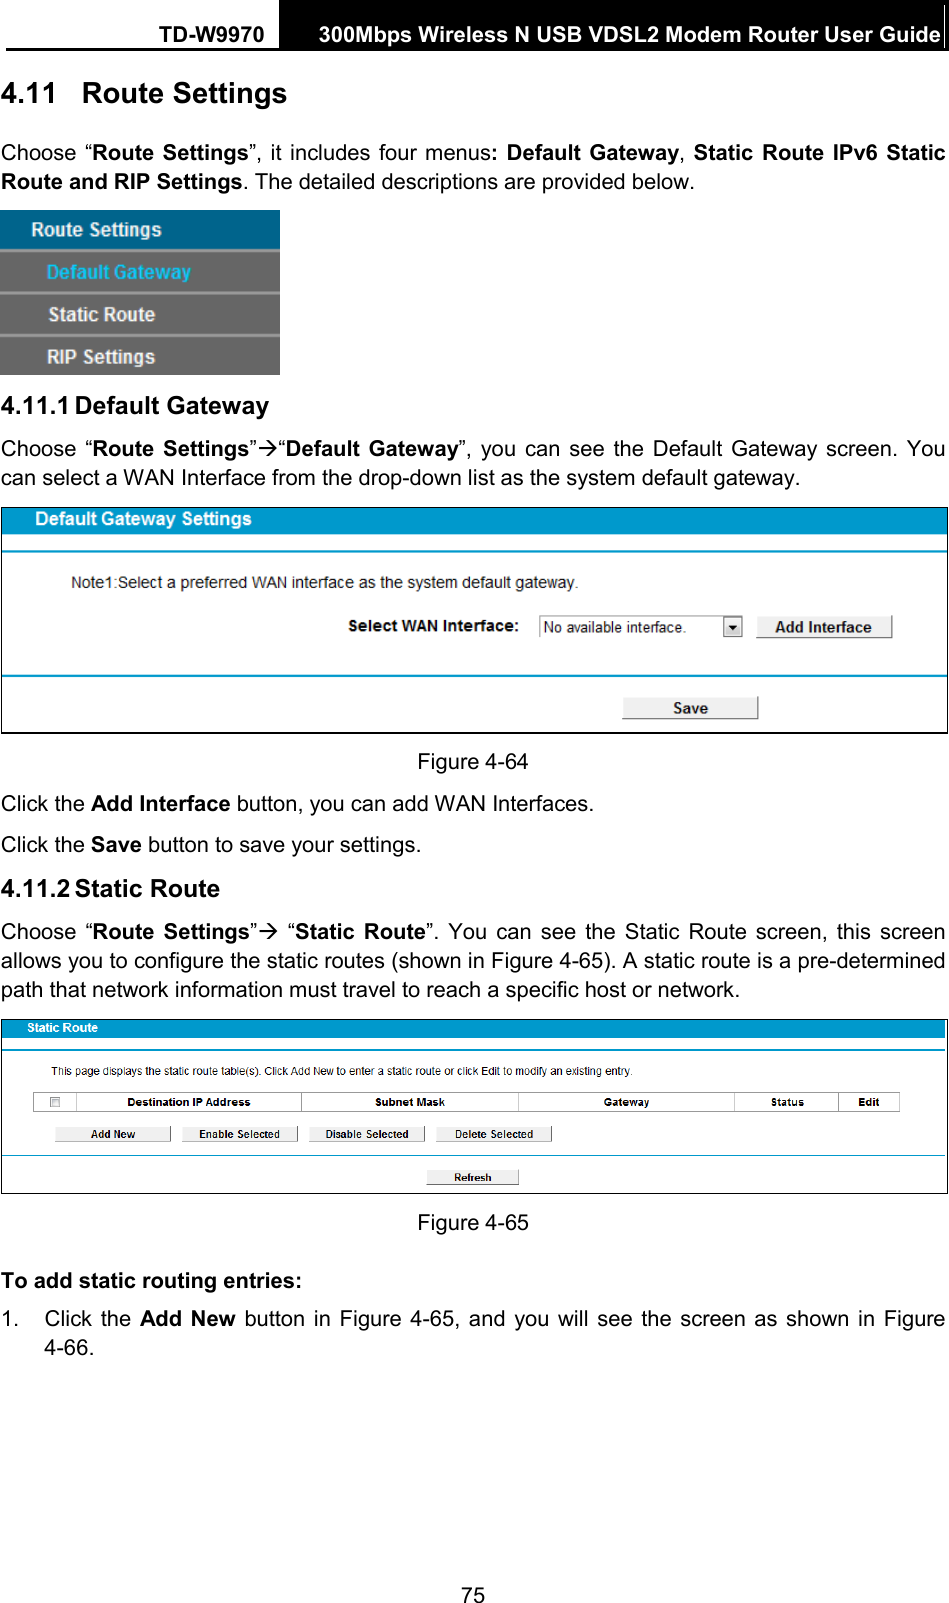 TD-W9970 300Mbps Wireless N USB VDSL2 Modem Router User Guide  4.11 Route Settings Choose “Route Settings”, it includes four menus: Default Gateway, Static Route IPv6 Static Route and RIP Settings. The detailed descriptions are provided below.  4.11.1 Default Gateway Choose “Route  Settings”“Default Gateway”, you can see the Default Gateway screen.  You can select a WAN Interface from the drop-down list as the system default gateway.    Figure 4-64 Click the Add Interface button, you can add WAN Interfaces. Click the Save button to save your settings. 4.11.2 Static Route Choose “Route  Settings”  “Static Route”.  You can see the Static Route screen, this screen allows you to configure the static routes (shown in Figure 4-65). A static route is a pre-determined path that network information must travel to reach a specific host or network.  Figure 4-65 To add static routing entries: 1. Click the Add New button in Figure 4-65, and you will see the screen as  shown in Figure 4-66.   75 